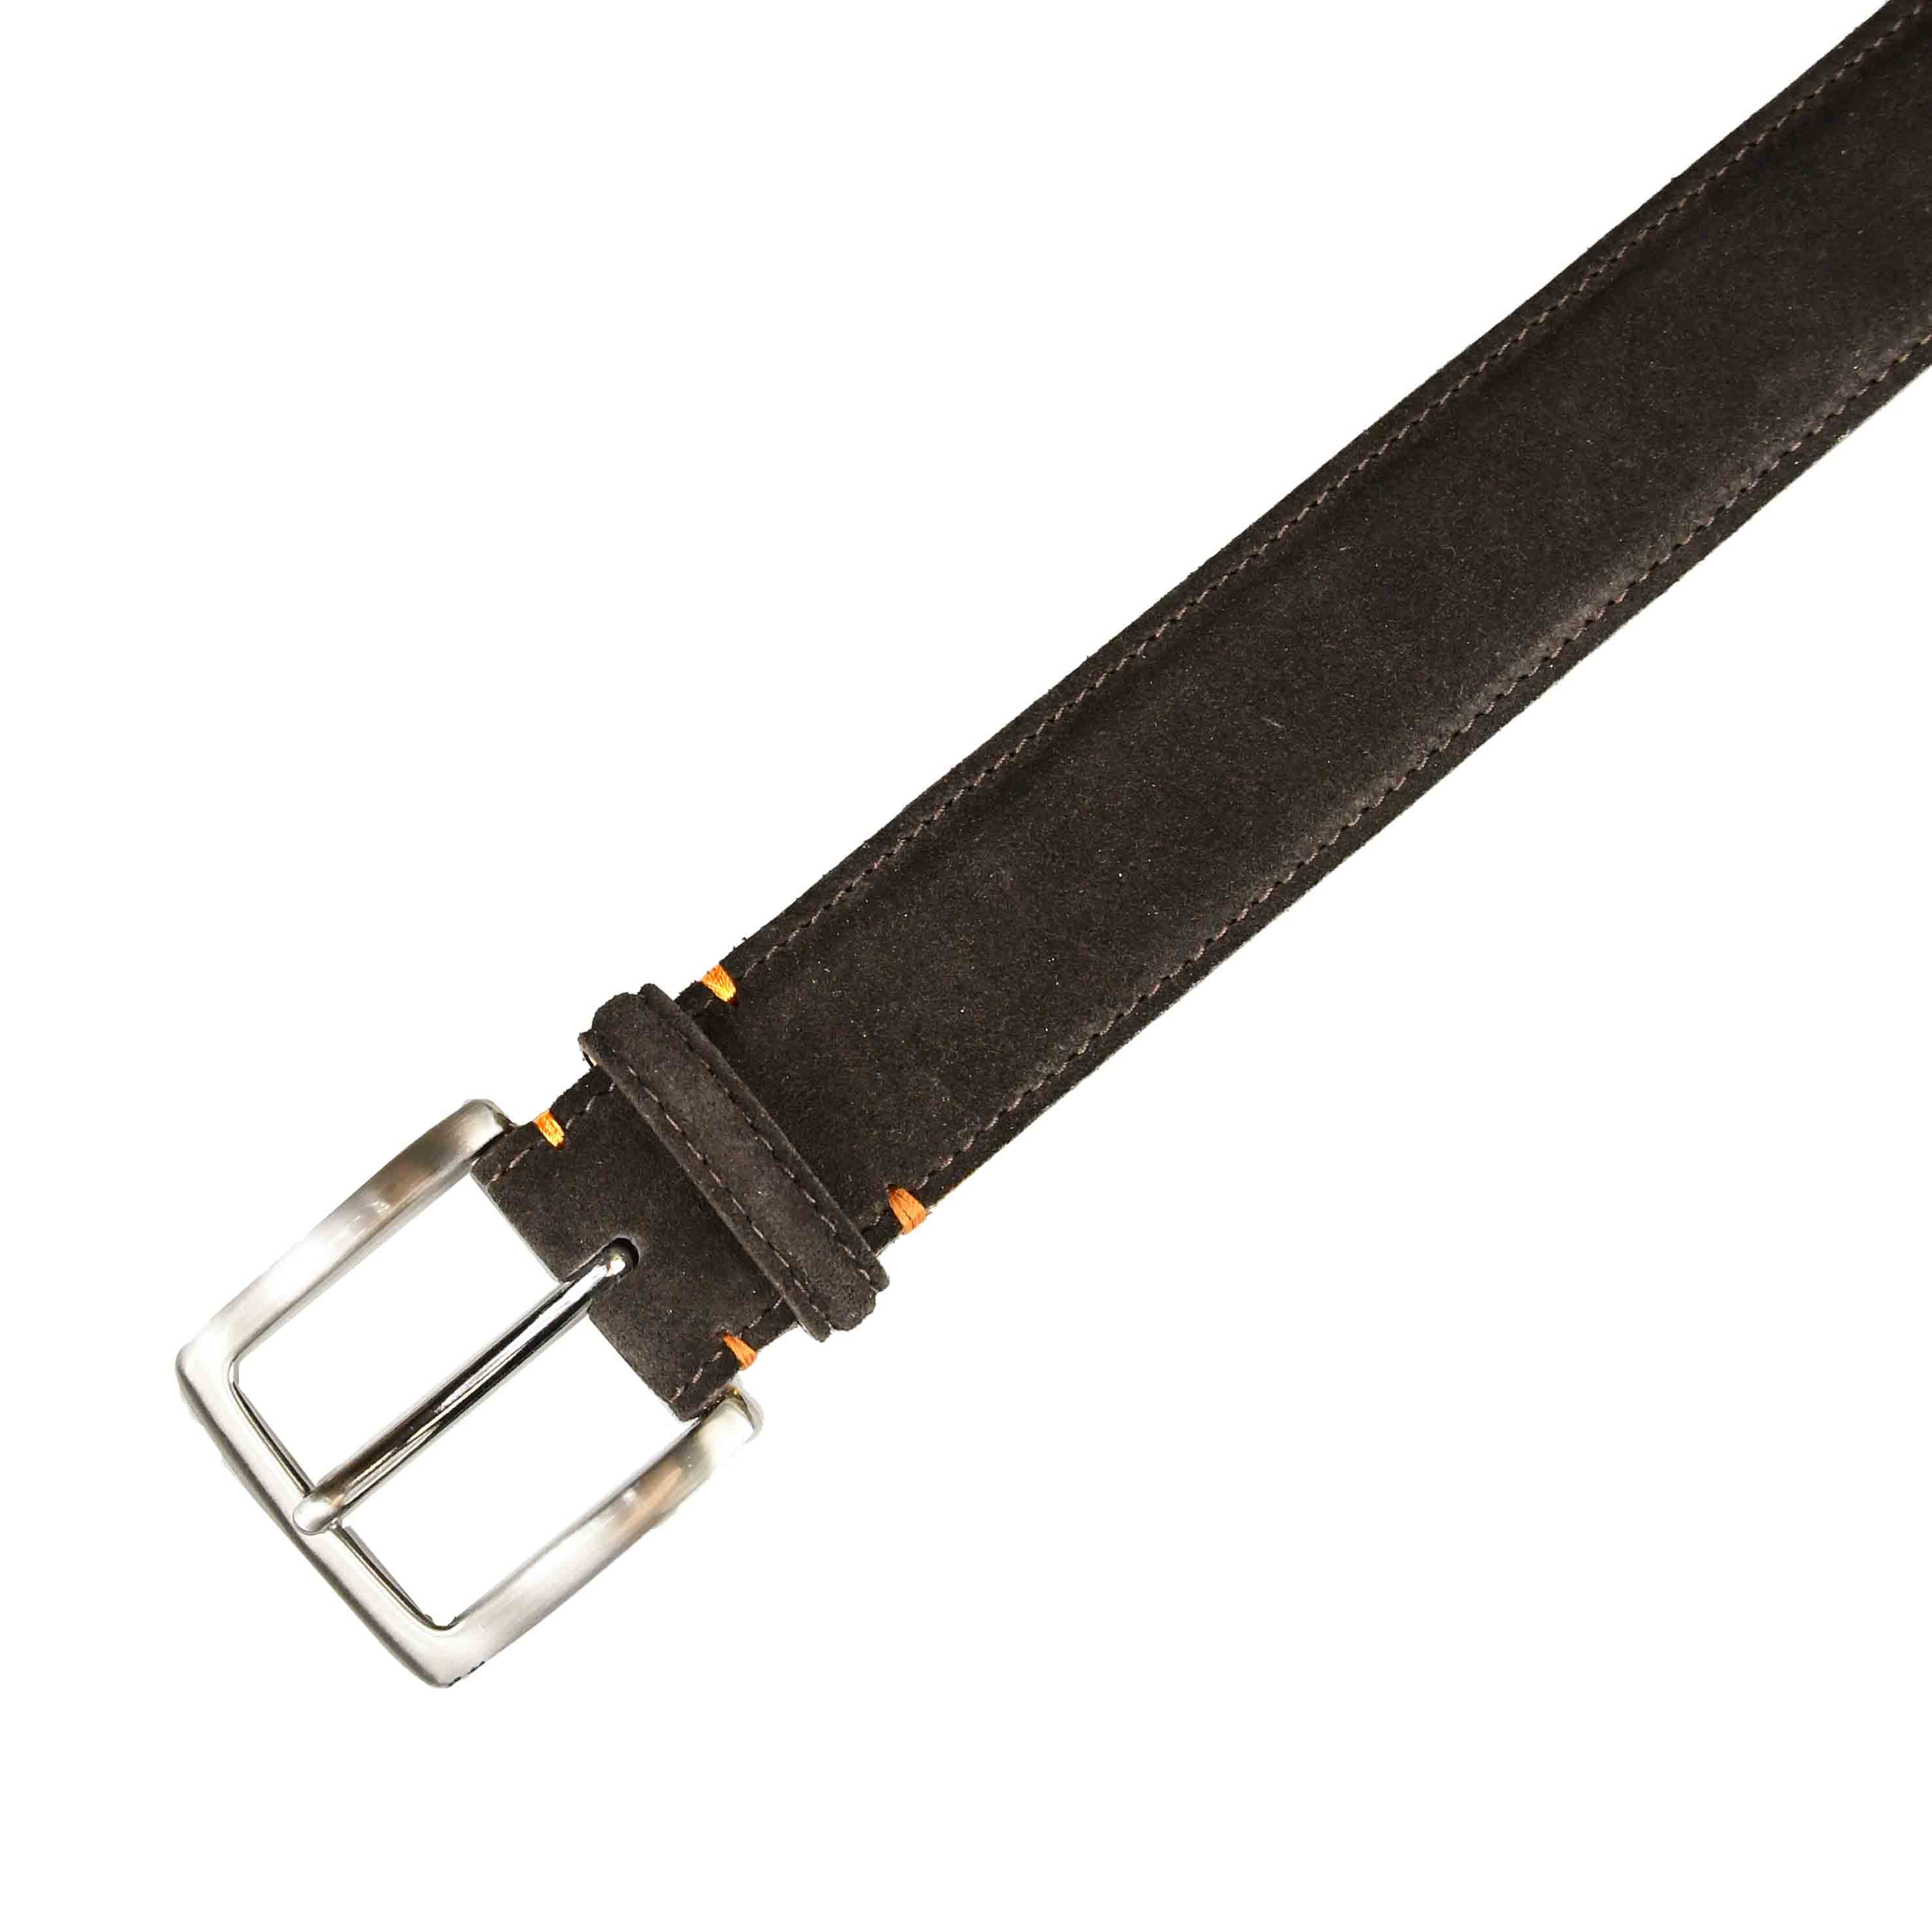 Cheaney Black Calf Belt with Gold Buckle